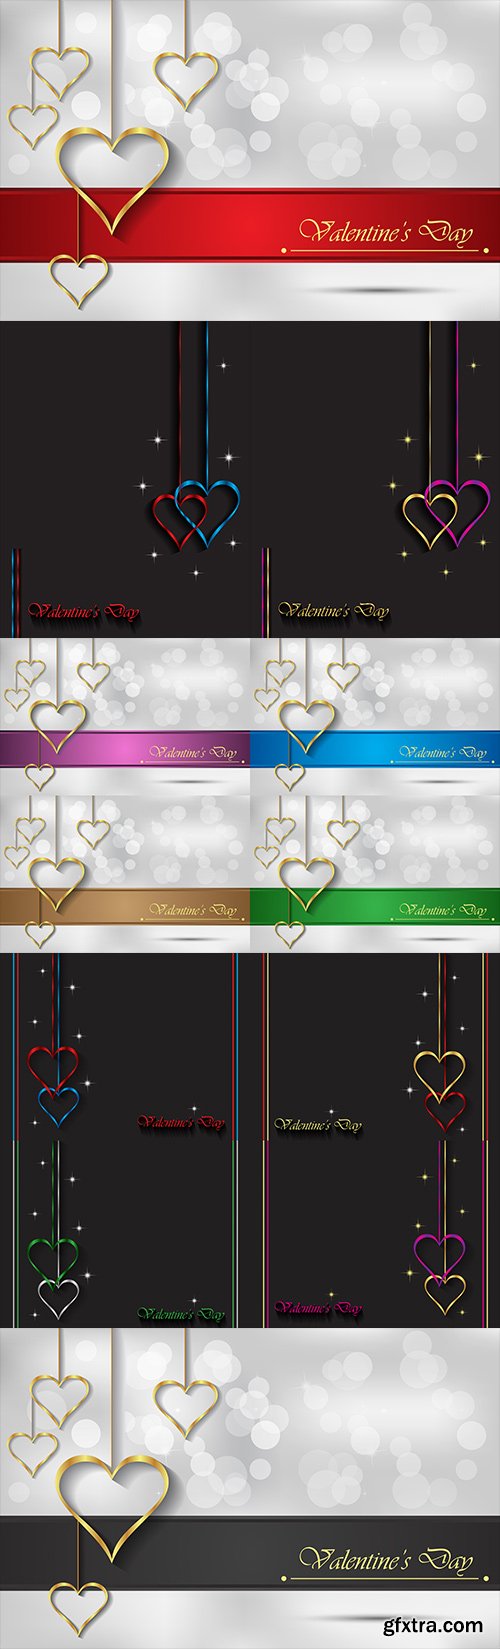 Golden hearts on light and dark background